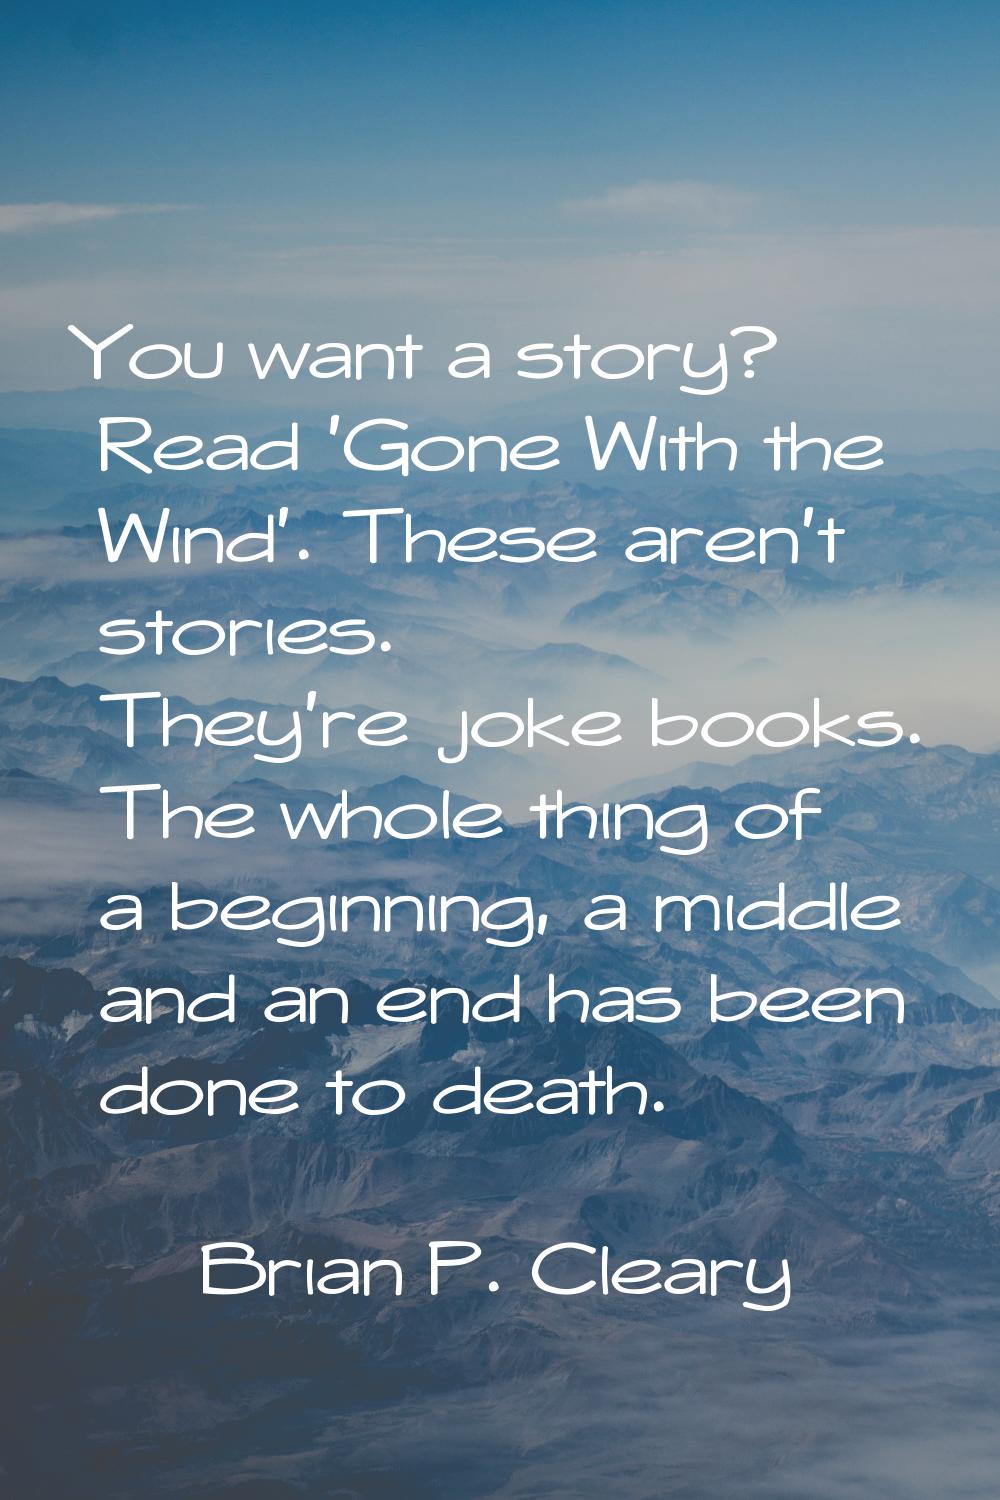 You want a story? Read 'Gone With the Wind'. These aren't stories. They're joke books. The whole th